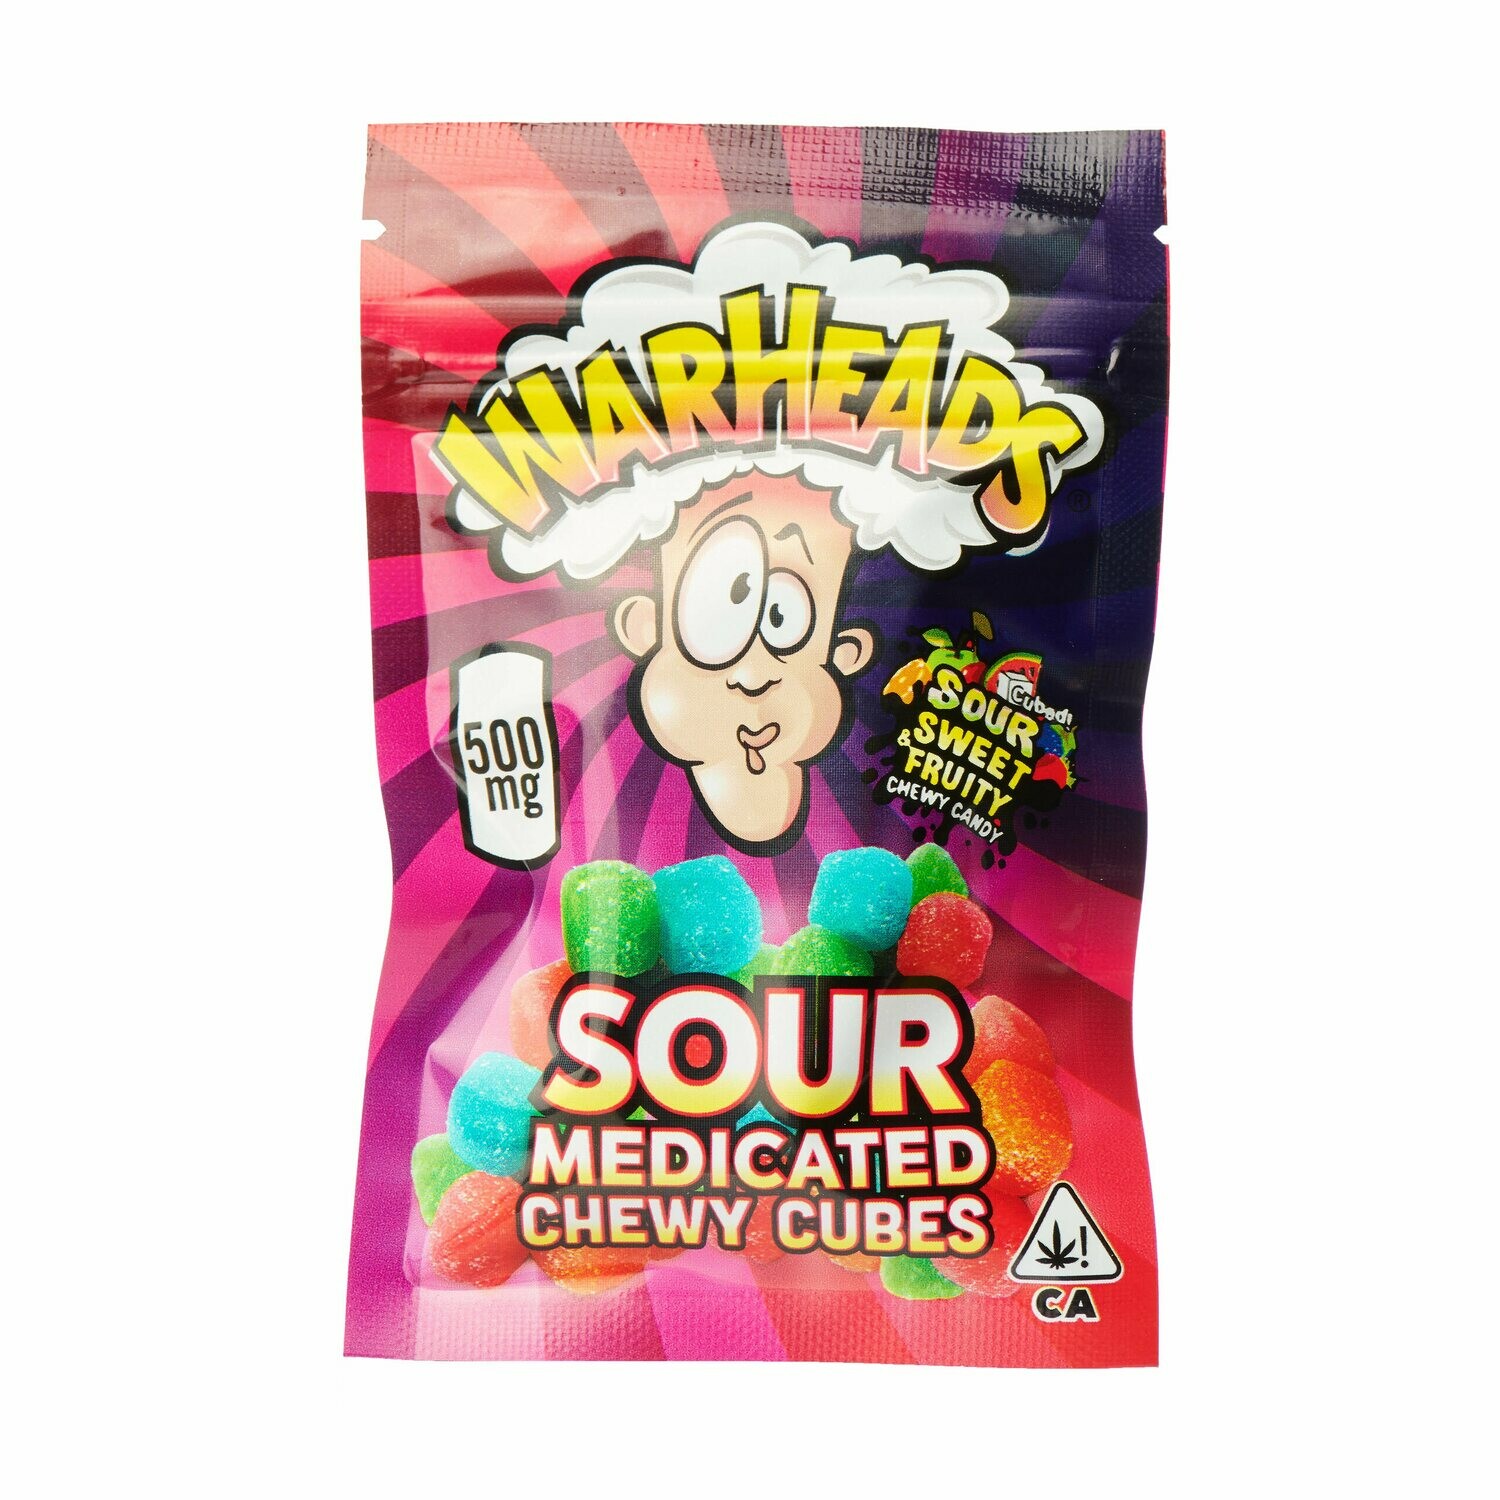 WARHEADS: CHEWY CUBES